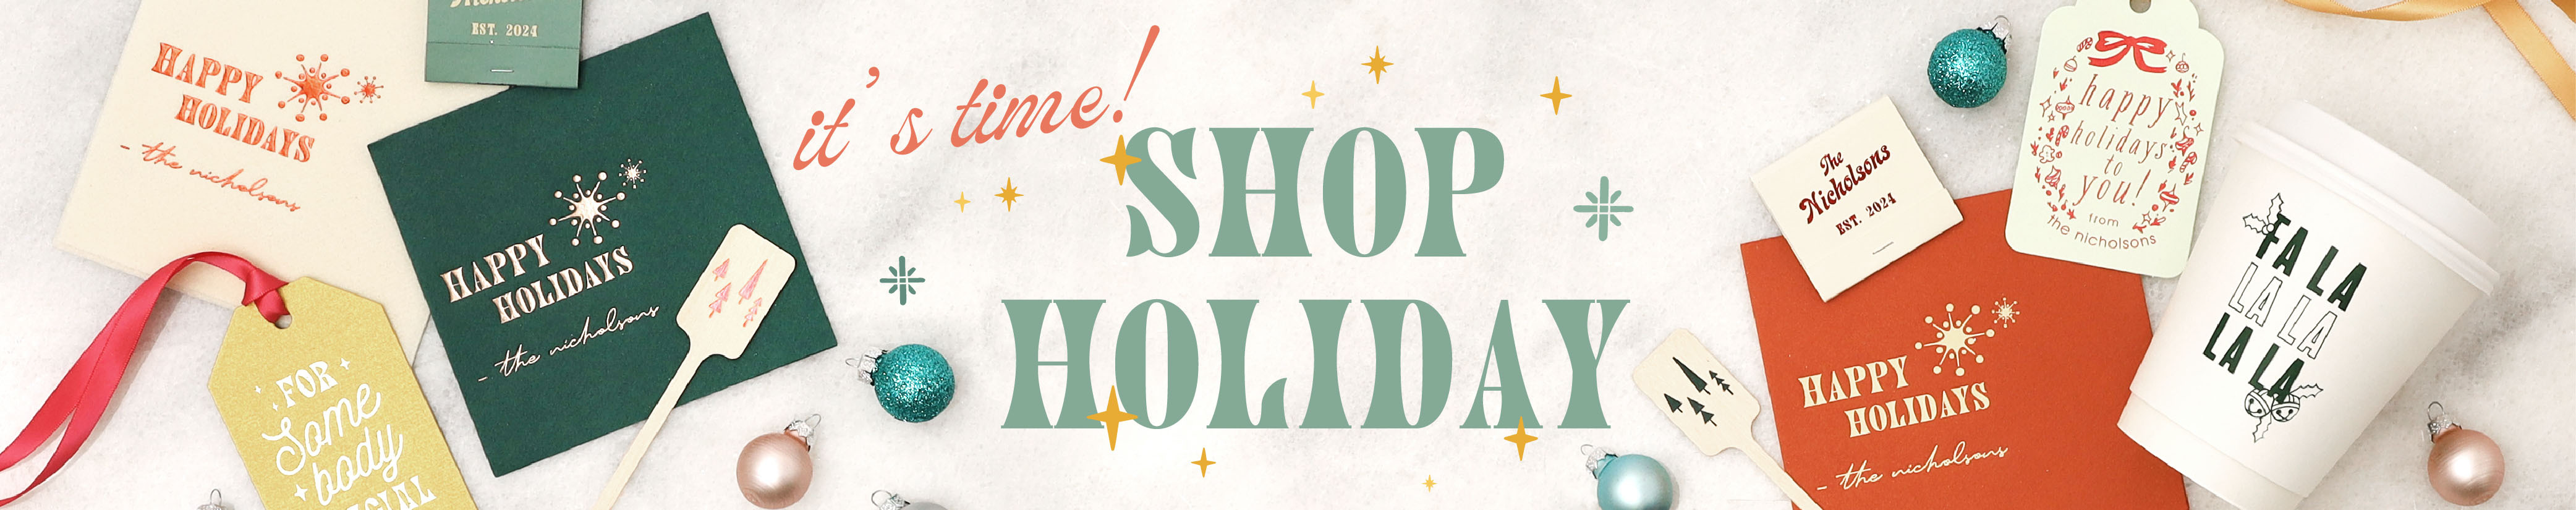 It's time! Shop holiday